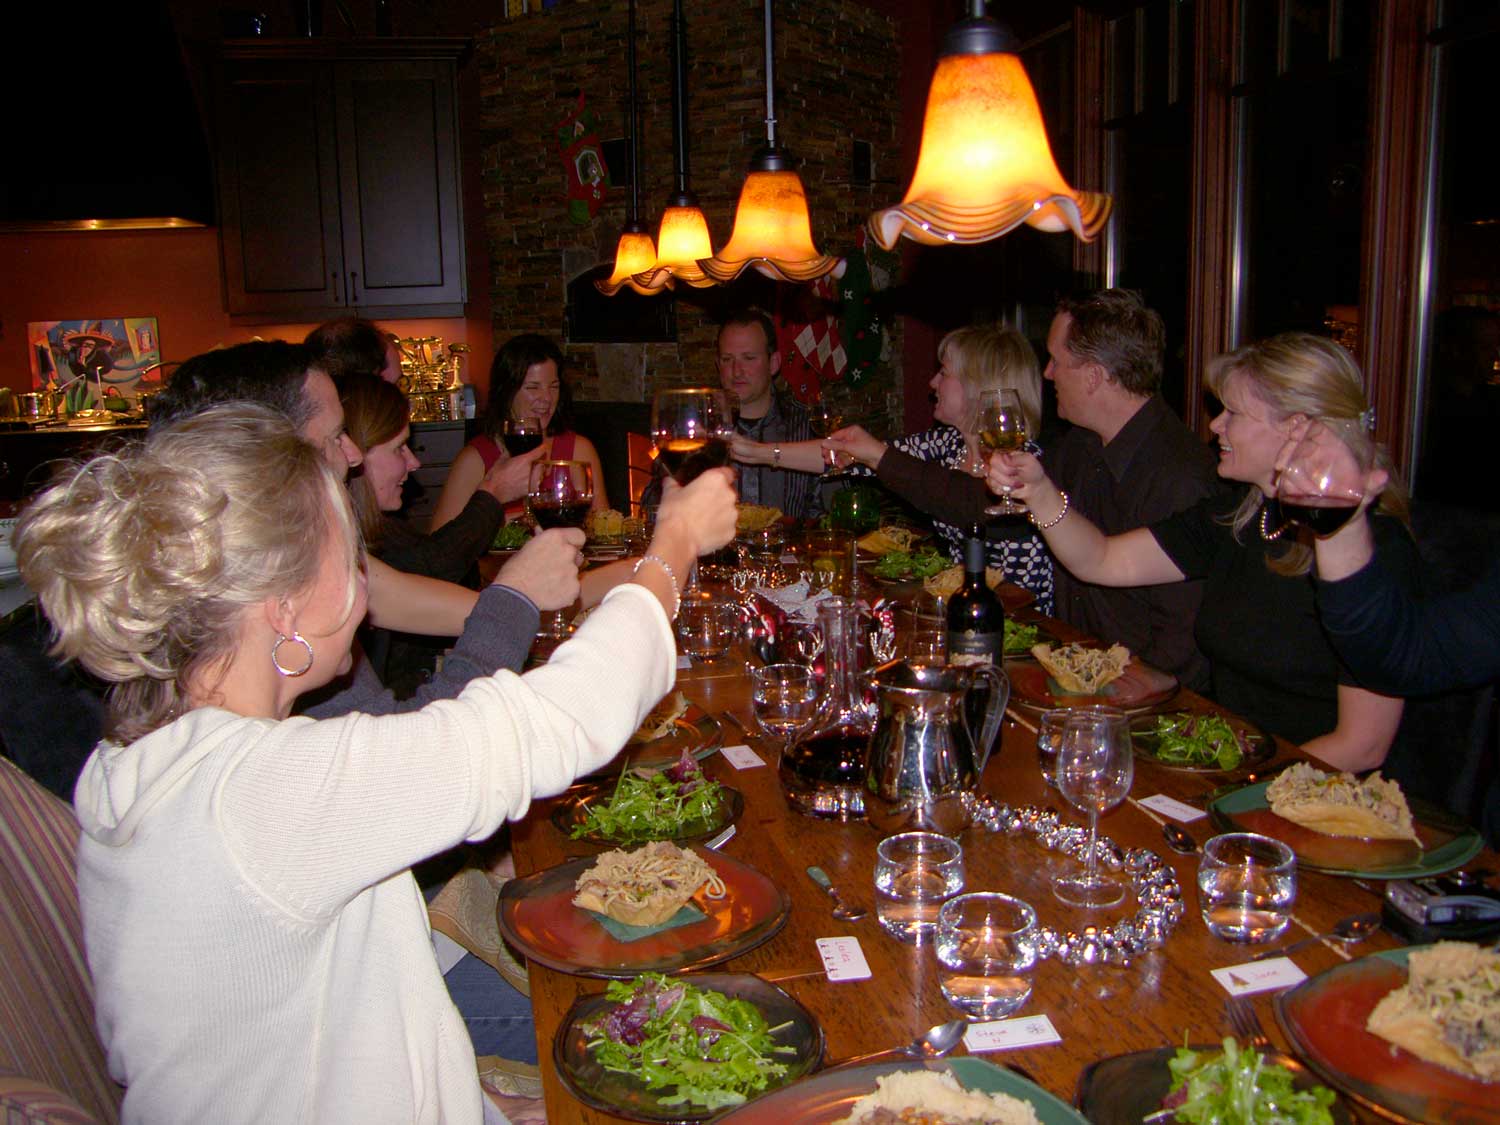 A group cheers and clinks their wine glasses together over the dinner table.